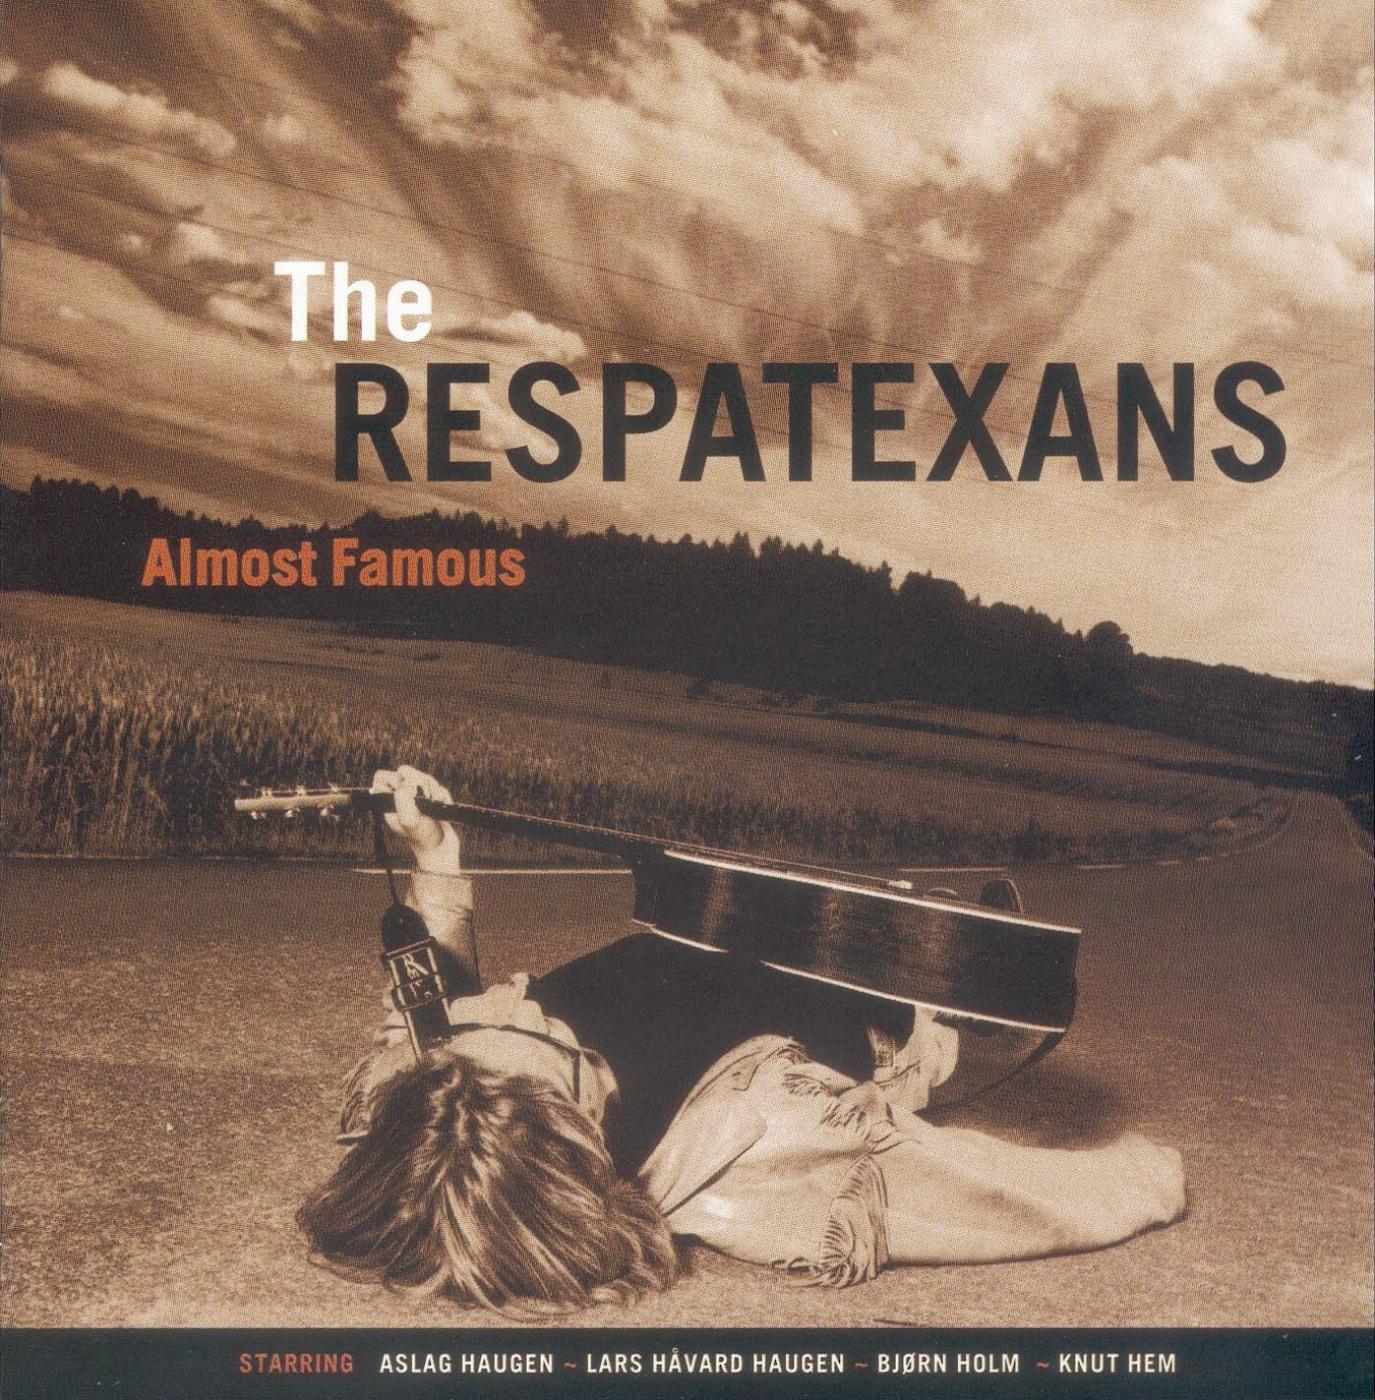 The Respatexans - Almost Famous